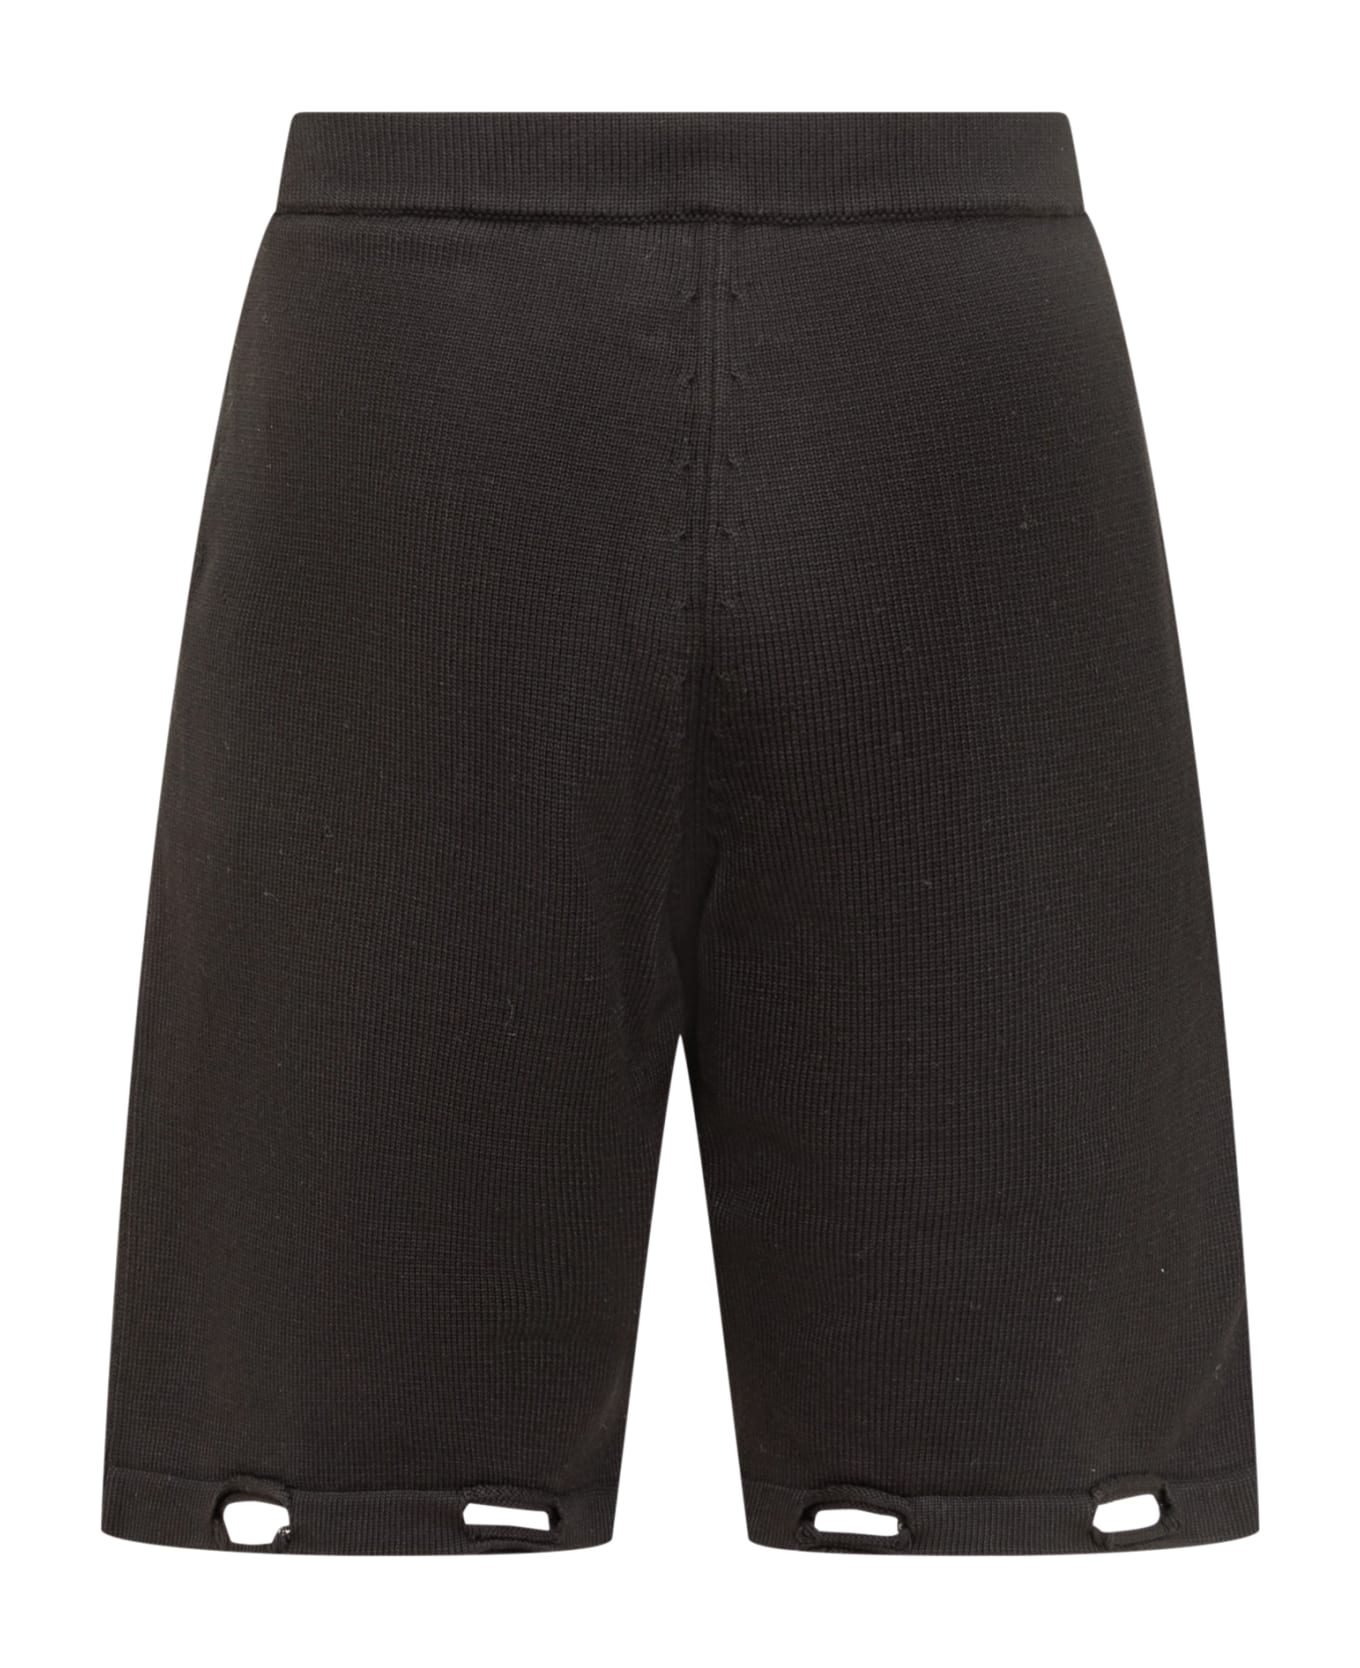 Givenchy Embroidered Knit Shorts - BLACK/WHITE